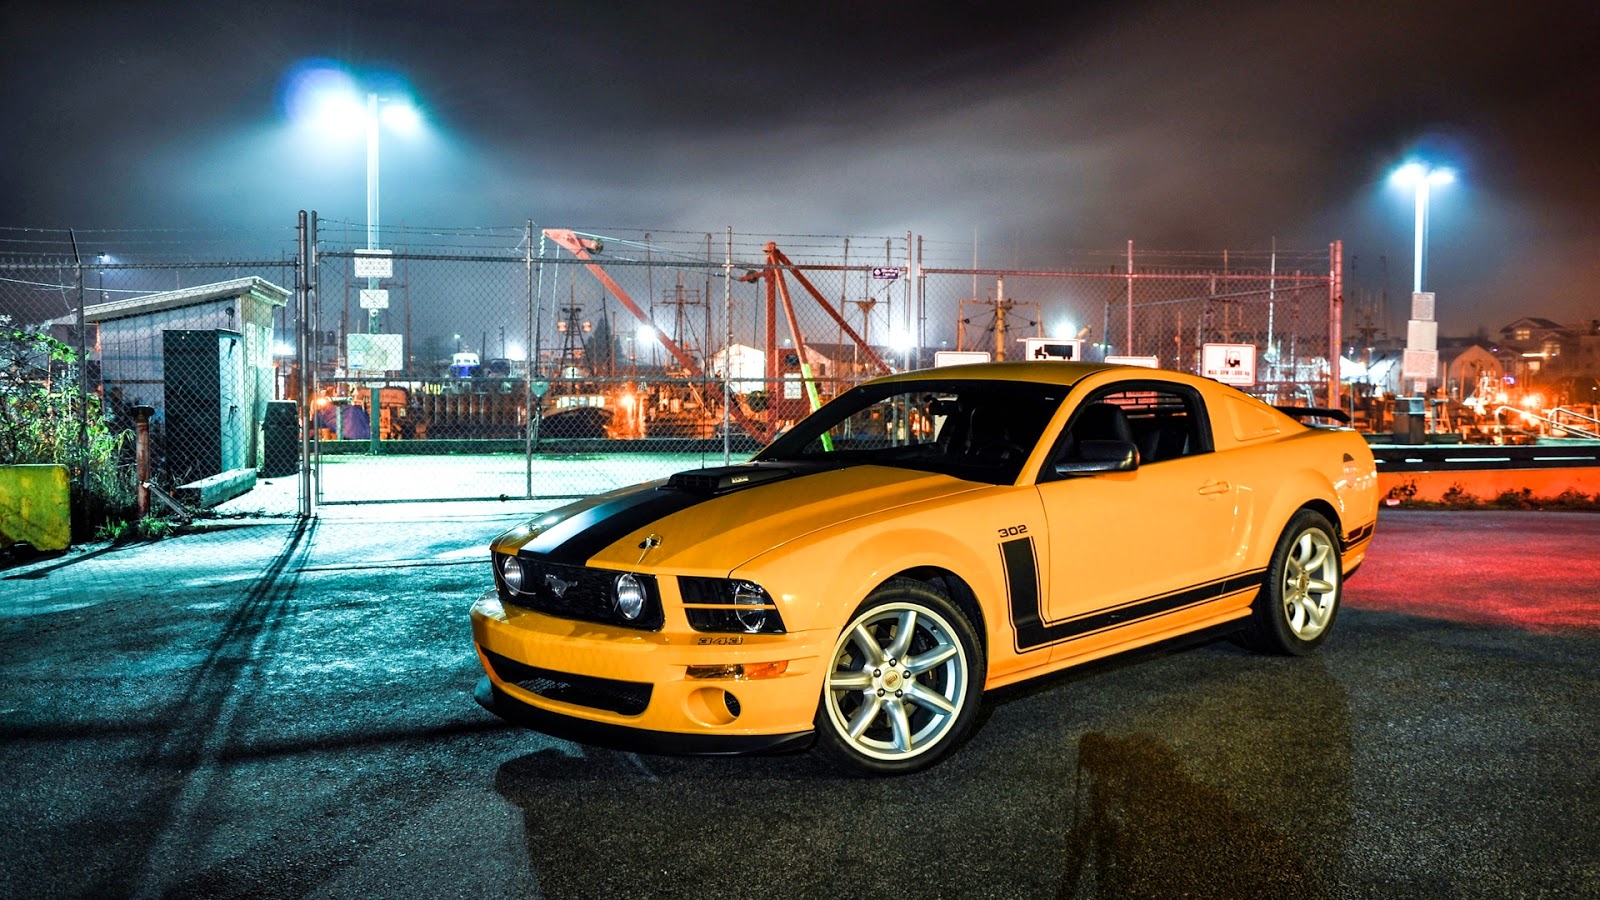 ford car wallpaper,land vehicle,vehicle,car,yellow,muscle car